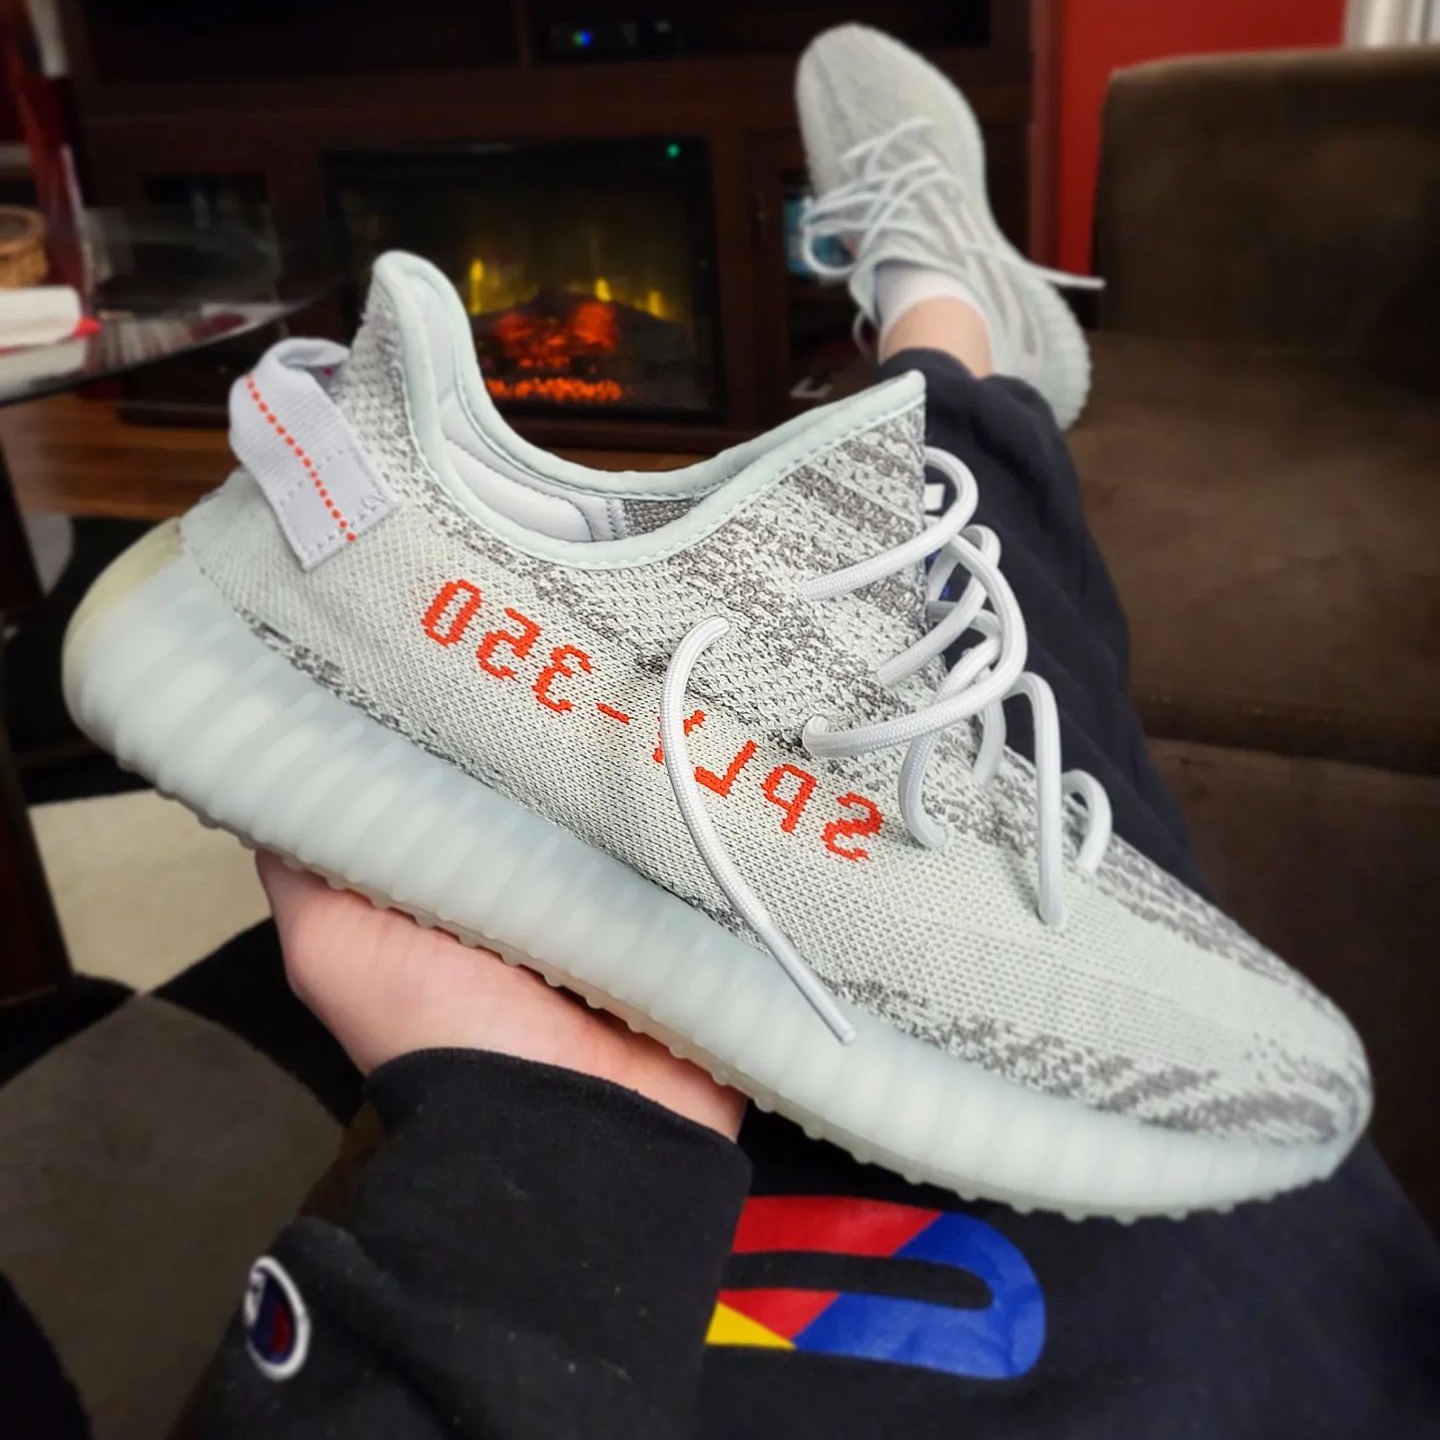 Adidas Yeezy Boost 350 v2 Blue Tint Sneakrers Shoes